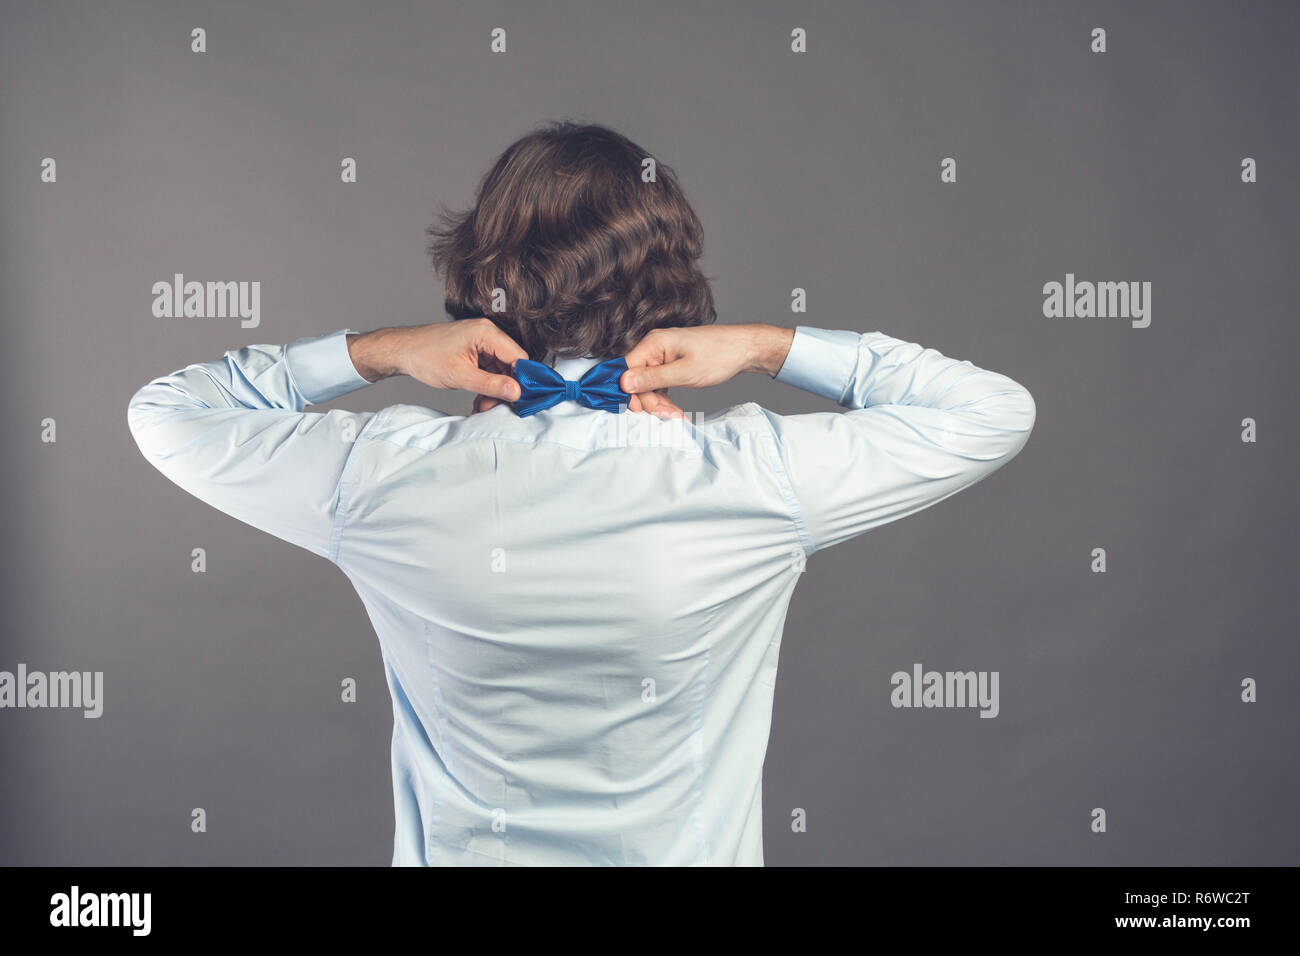 Mr. Perfection. Rear view of handsome shaggy curly young man wearing blue shirt adjusting his bow tie while standing back against grey background. Smartly dressed guy. Toned. Place for text Stock Photo